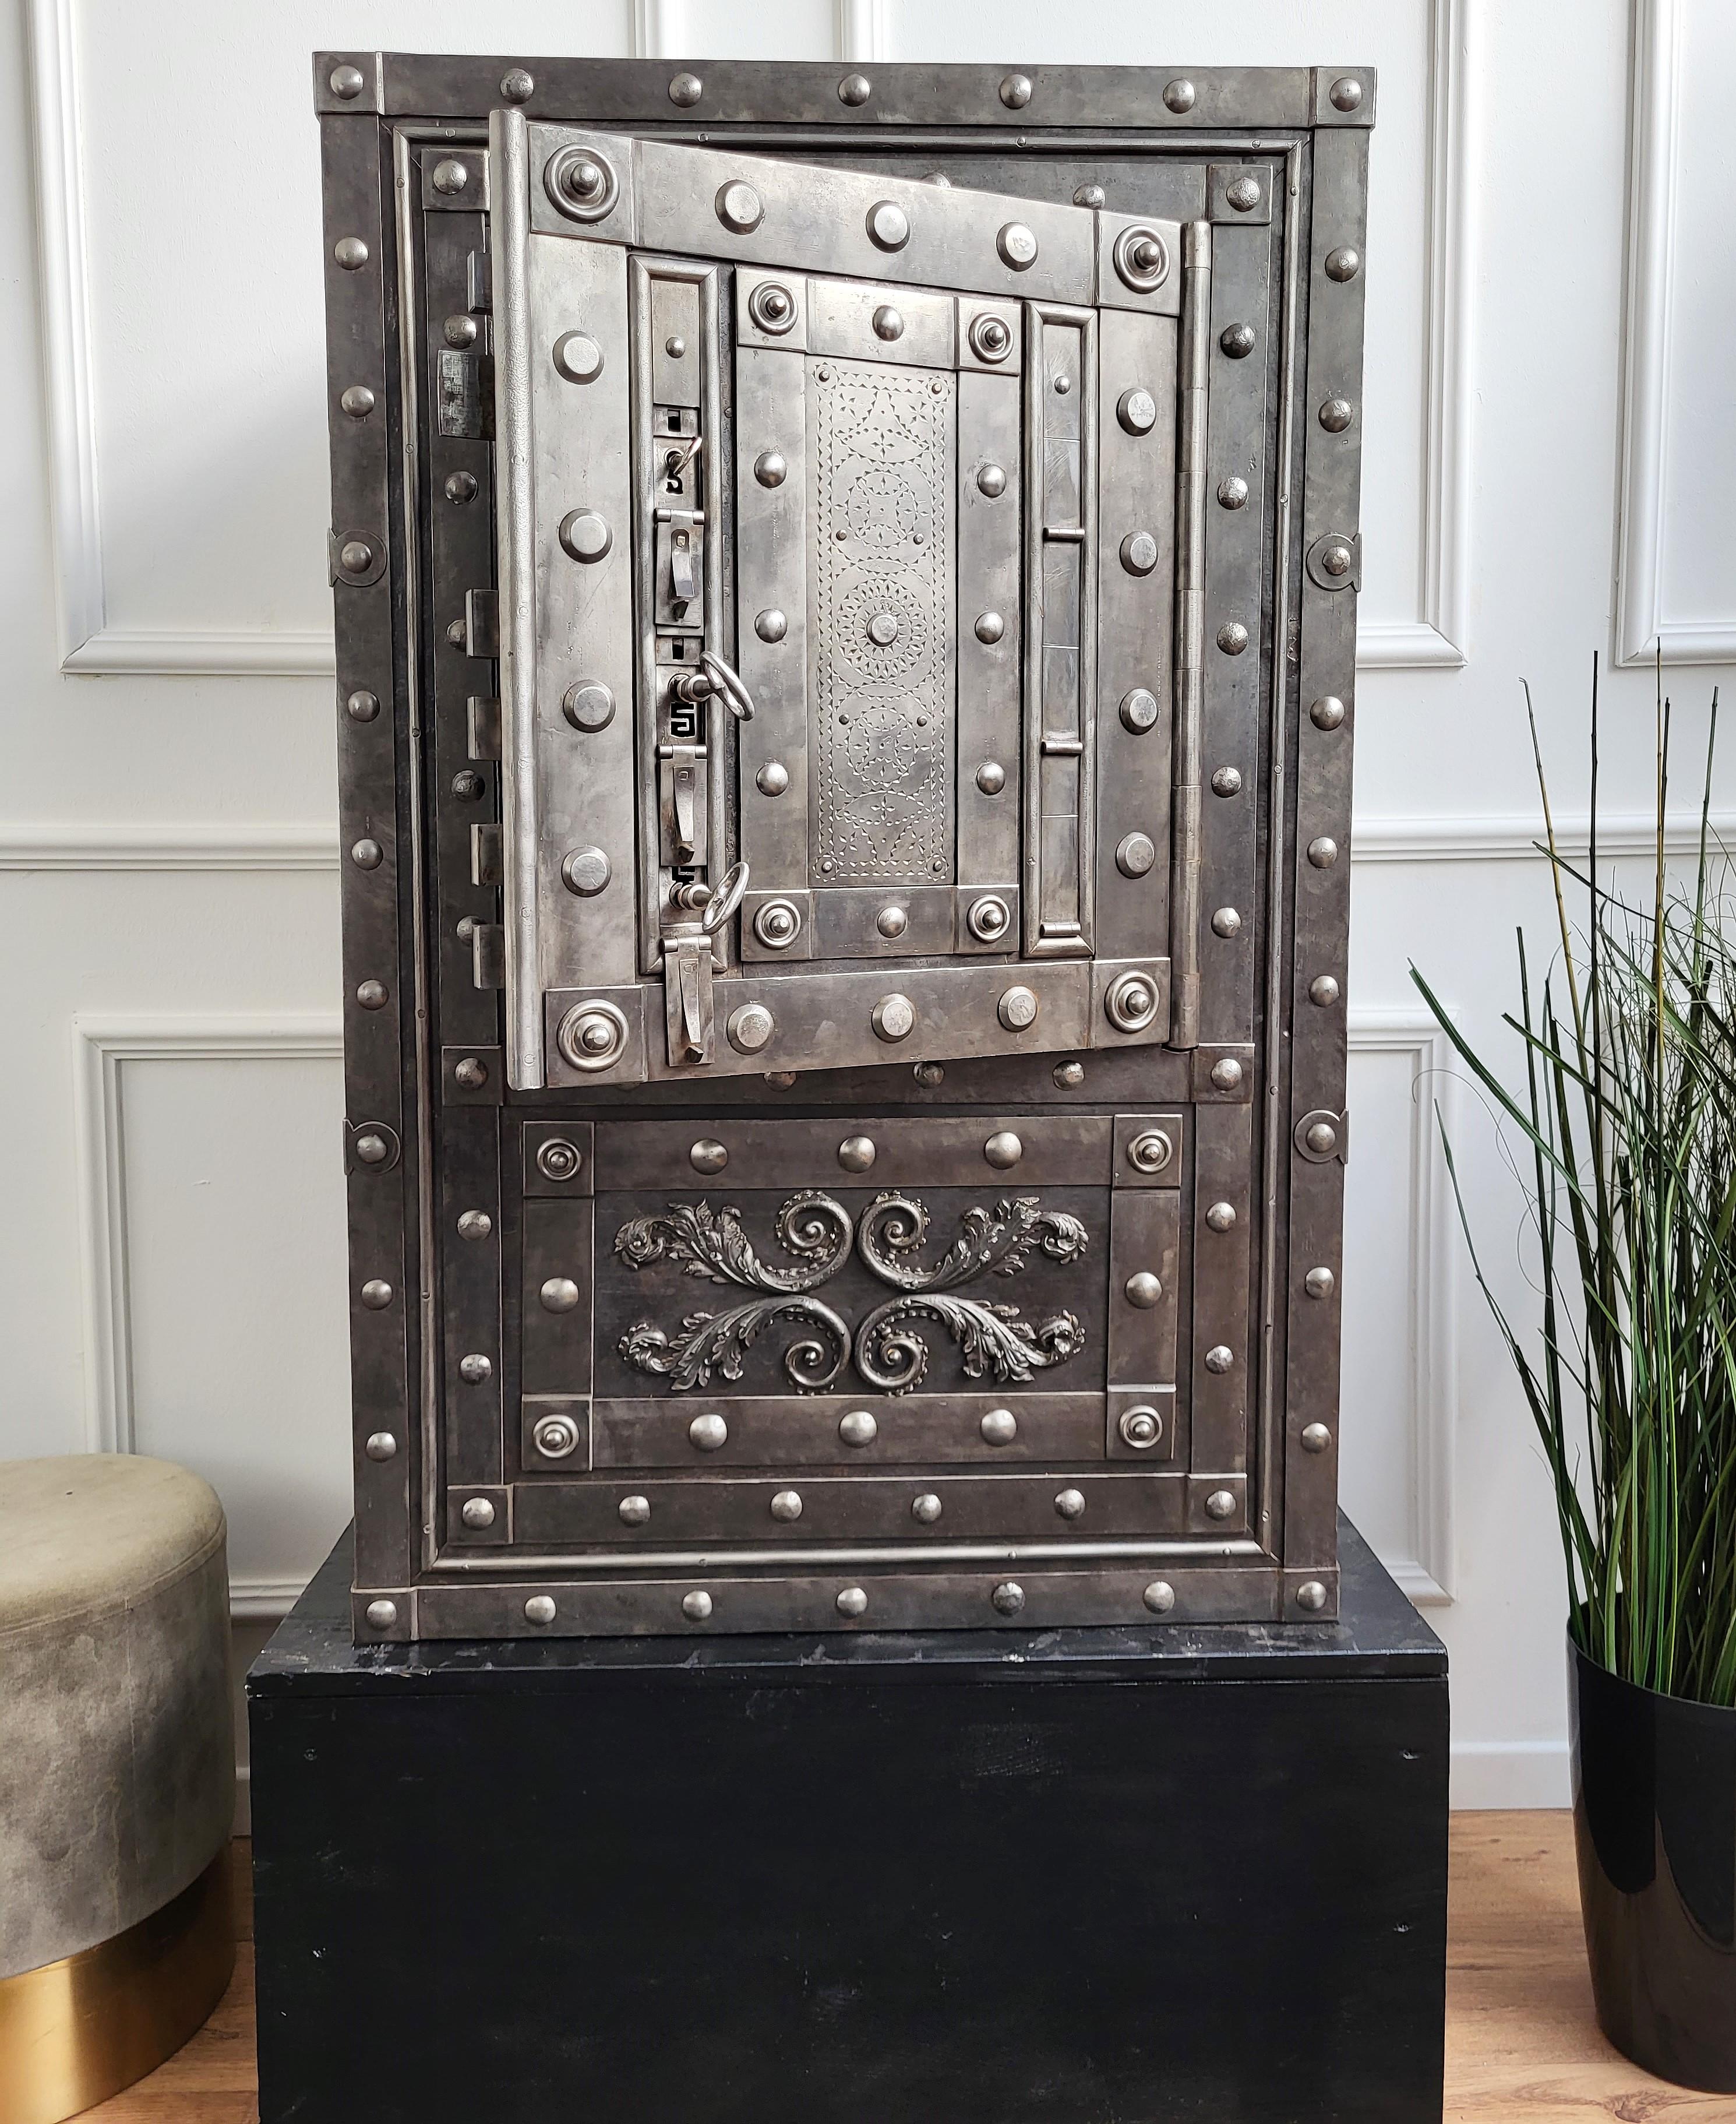 Beautiful and rare example of late 18th century Italian master blacksmith craftsmanship, this antique studded safe with typical all-around hobnails and great wrought iron details, is probably from the Piedmont region, has a great metal color with